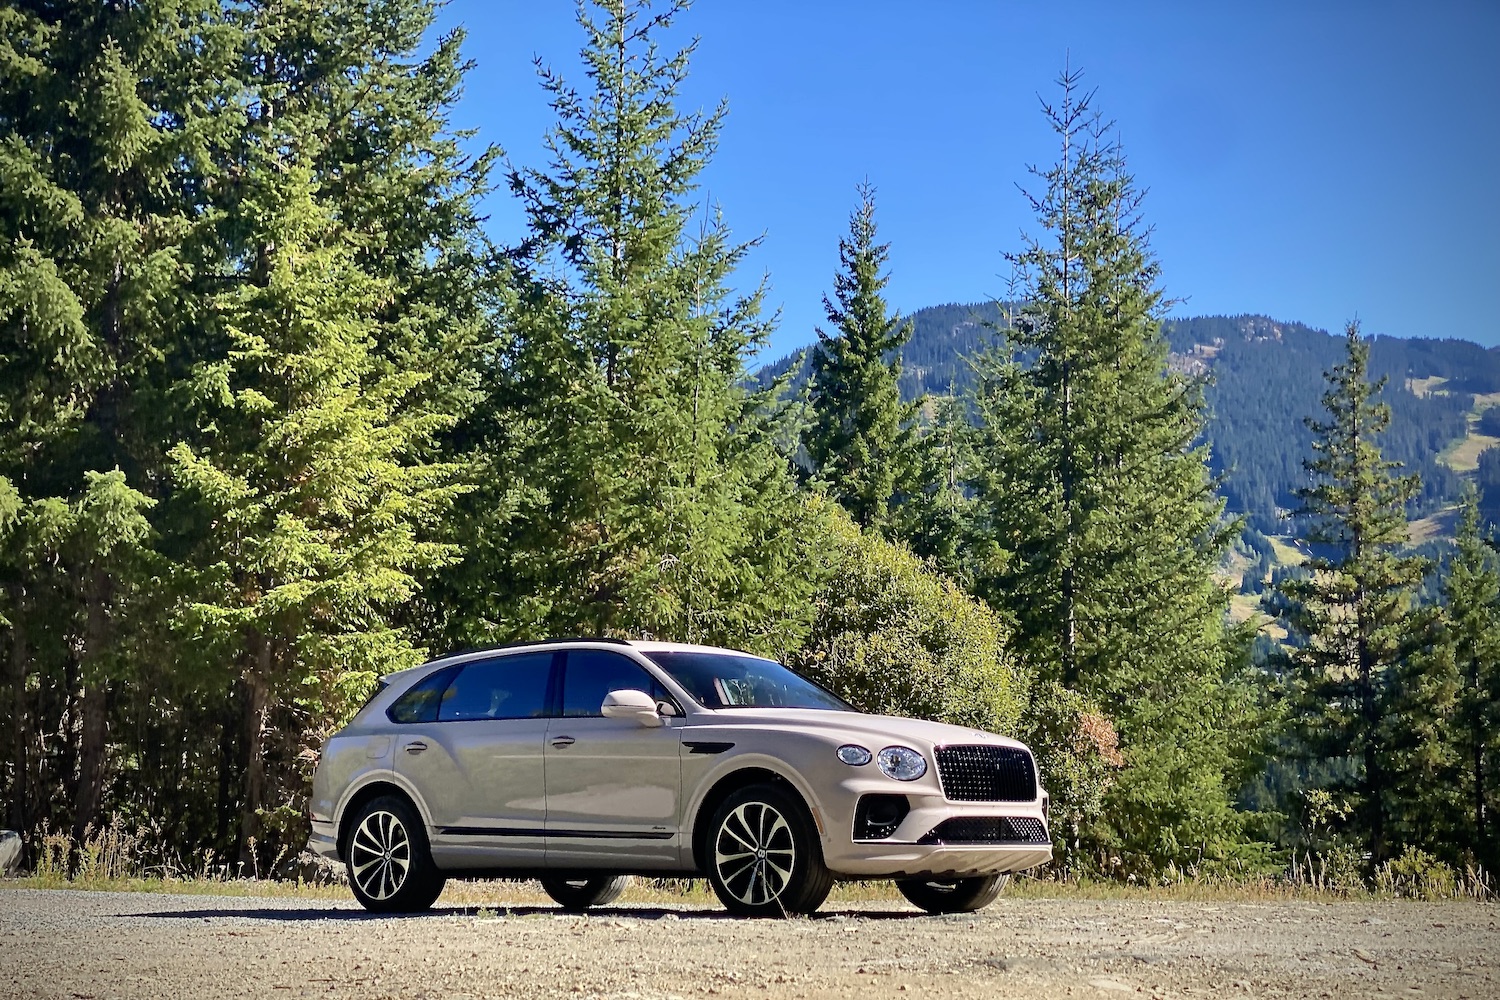 Front end angle of 2023 Bentley Bentayga EWB with trees and mountains in the back.